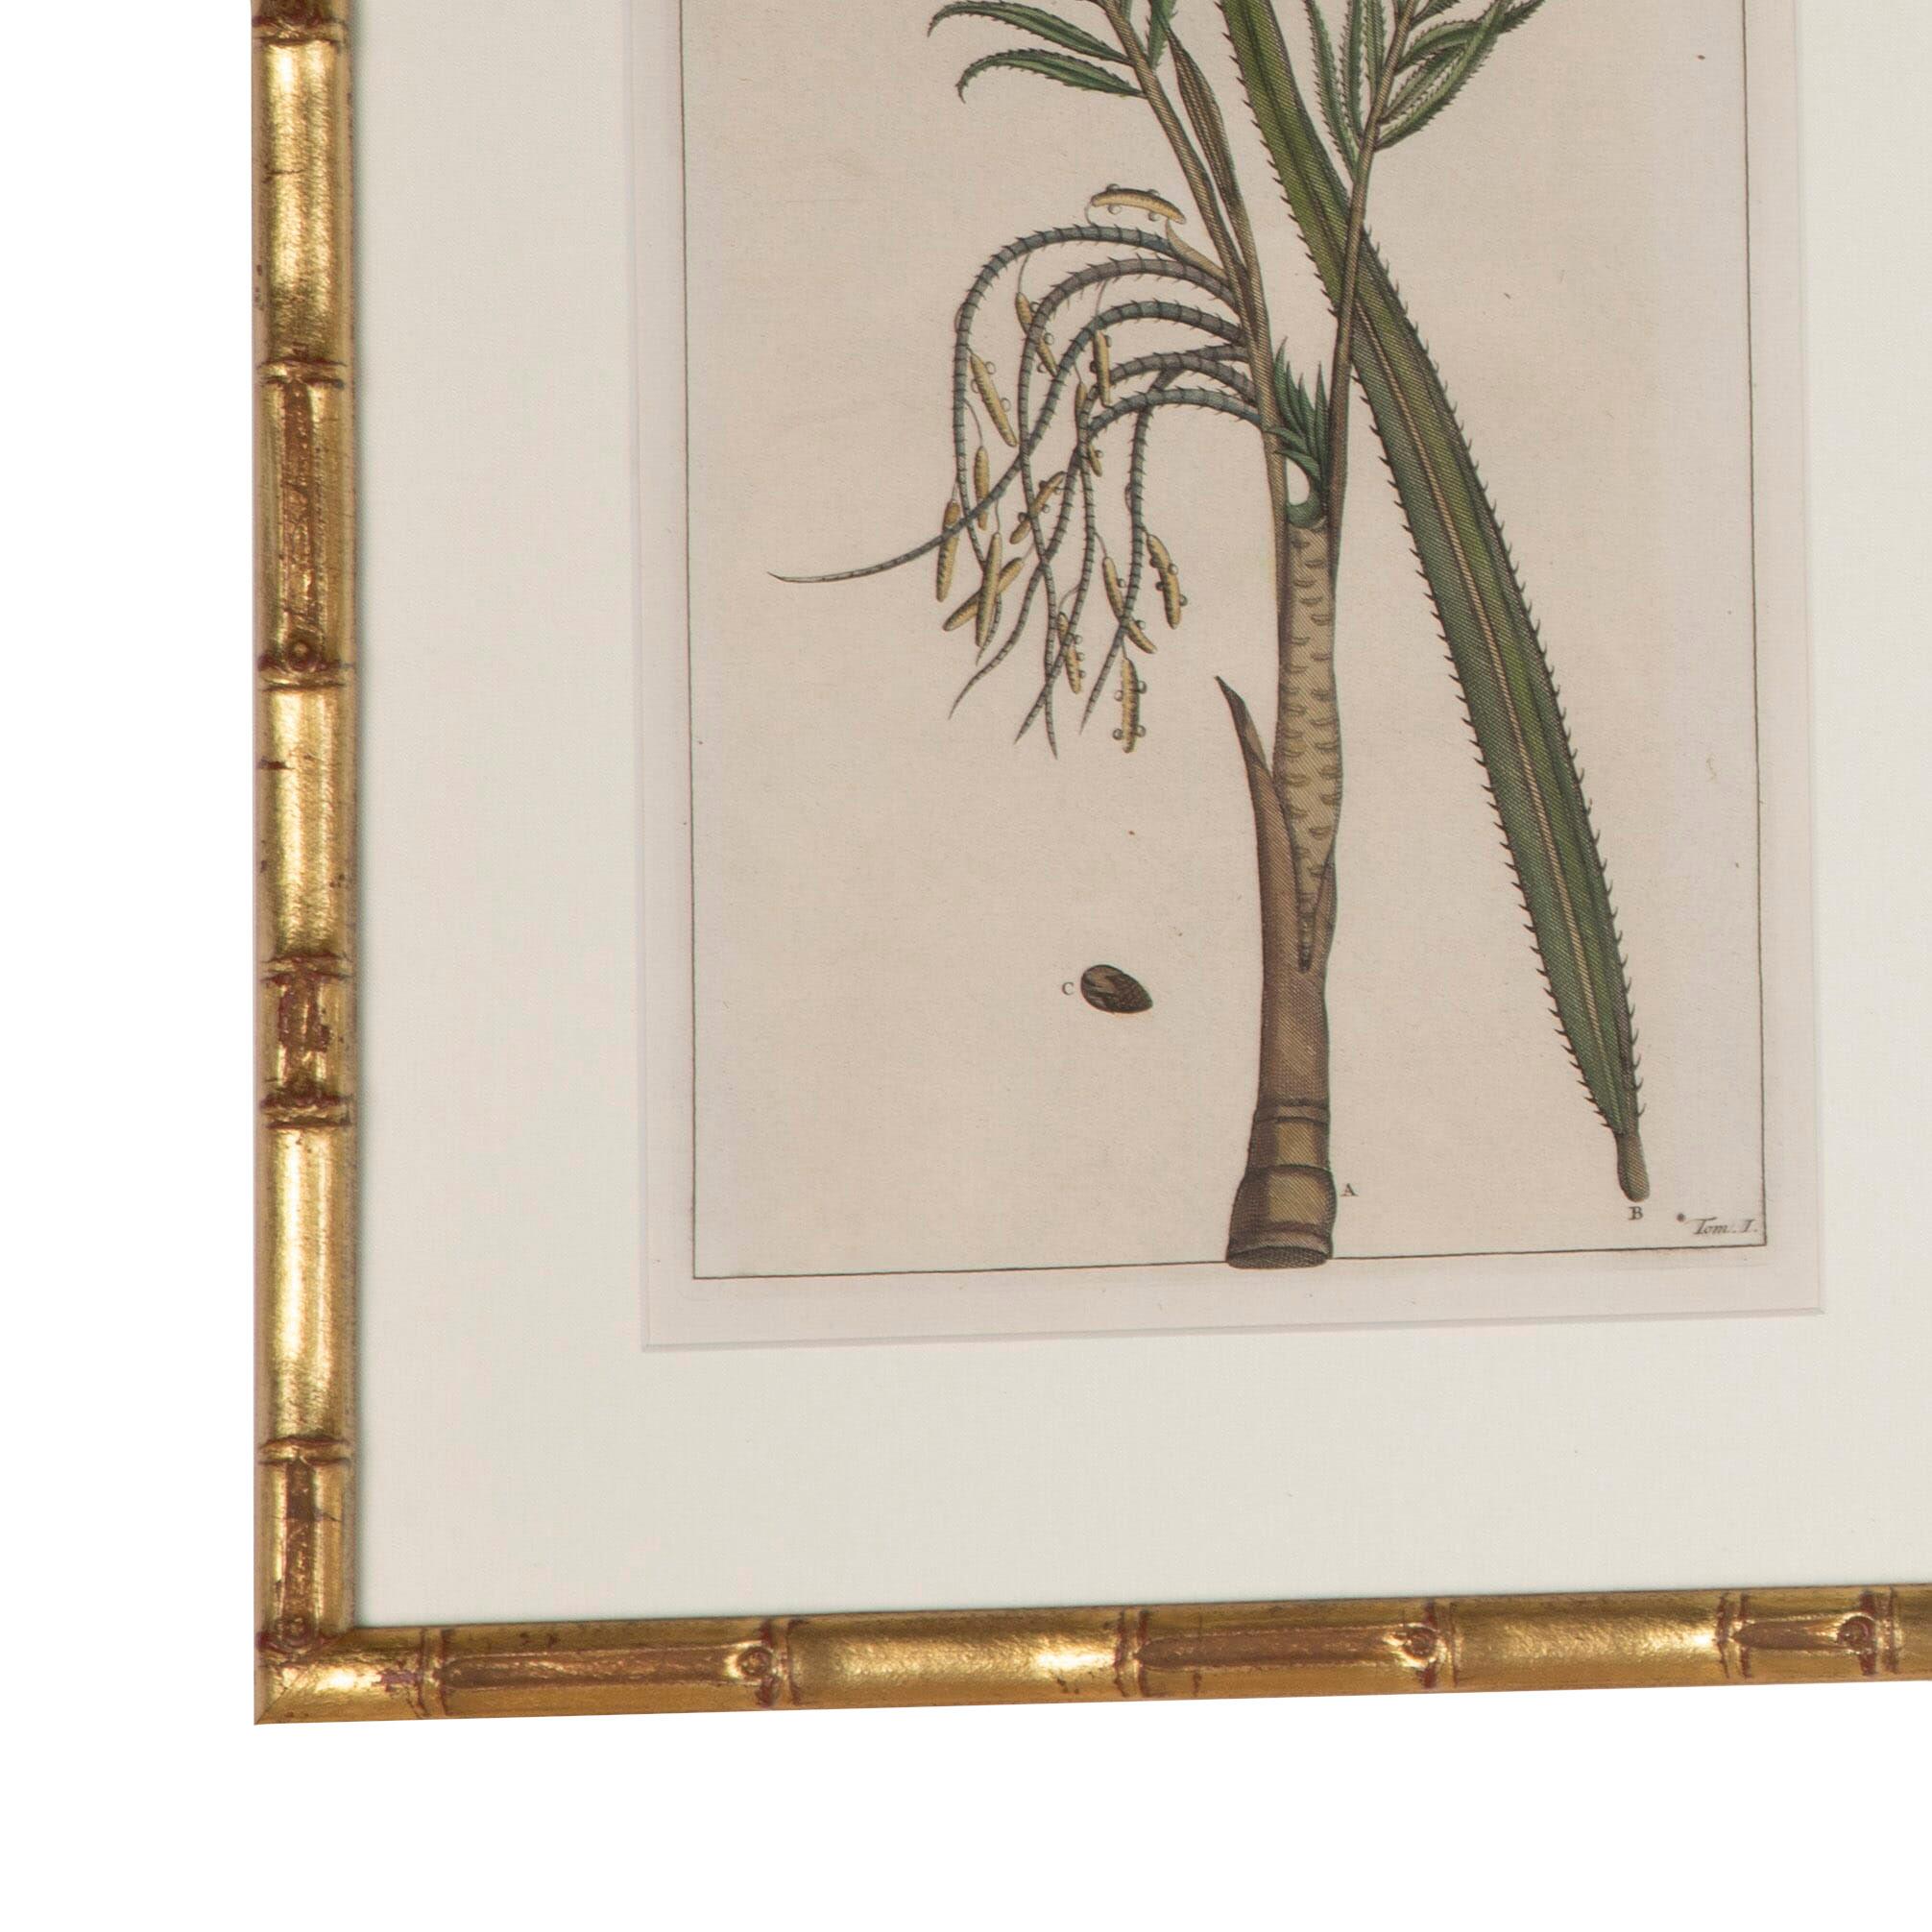 Collection of nine palm botanicals by George Eberhard Rumpf.
All nine are framed in Italian faux bamboo gilt frames, with tru-vu glass that affords clearer image quality and some protection. 